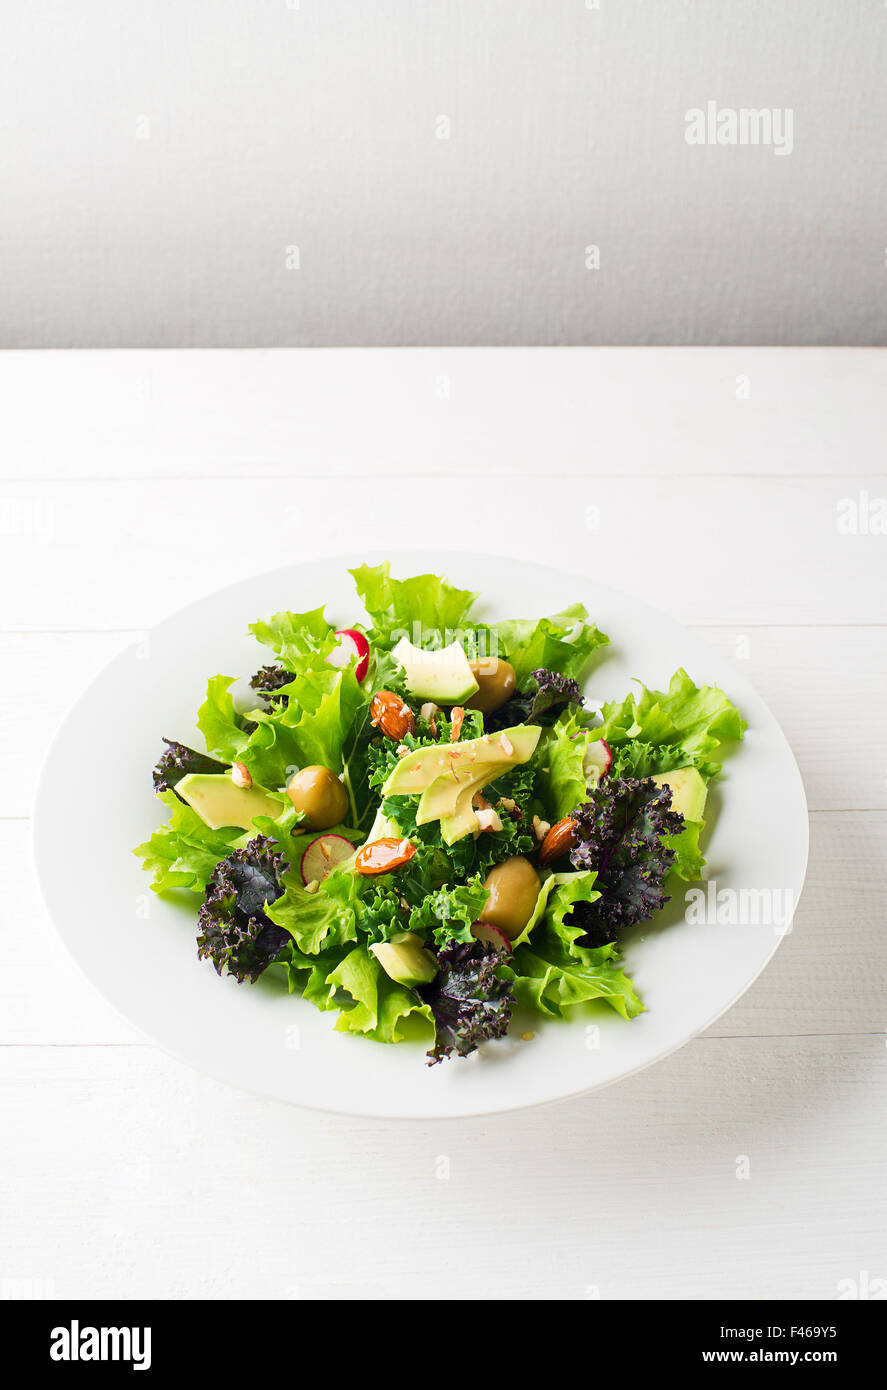 Fresh mixed green salad with avocado on the plate. Stock Photo